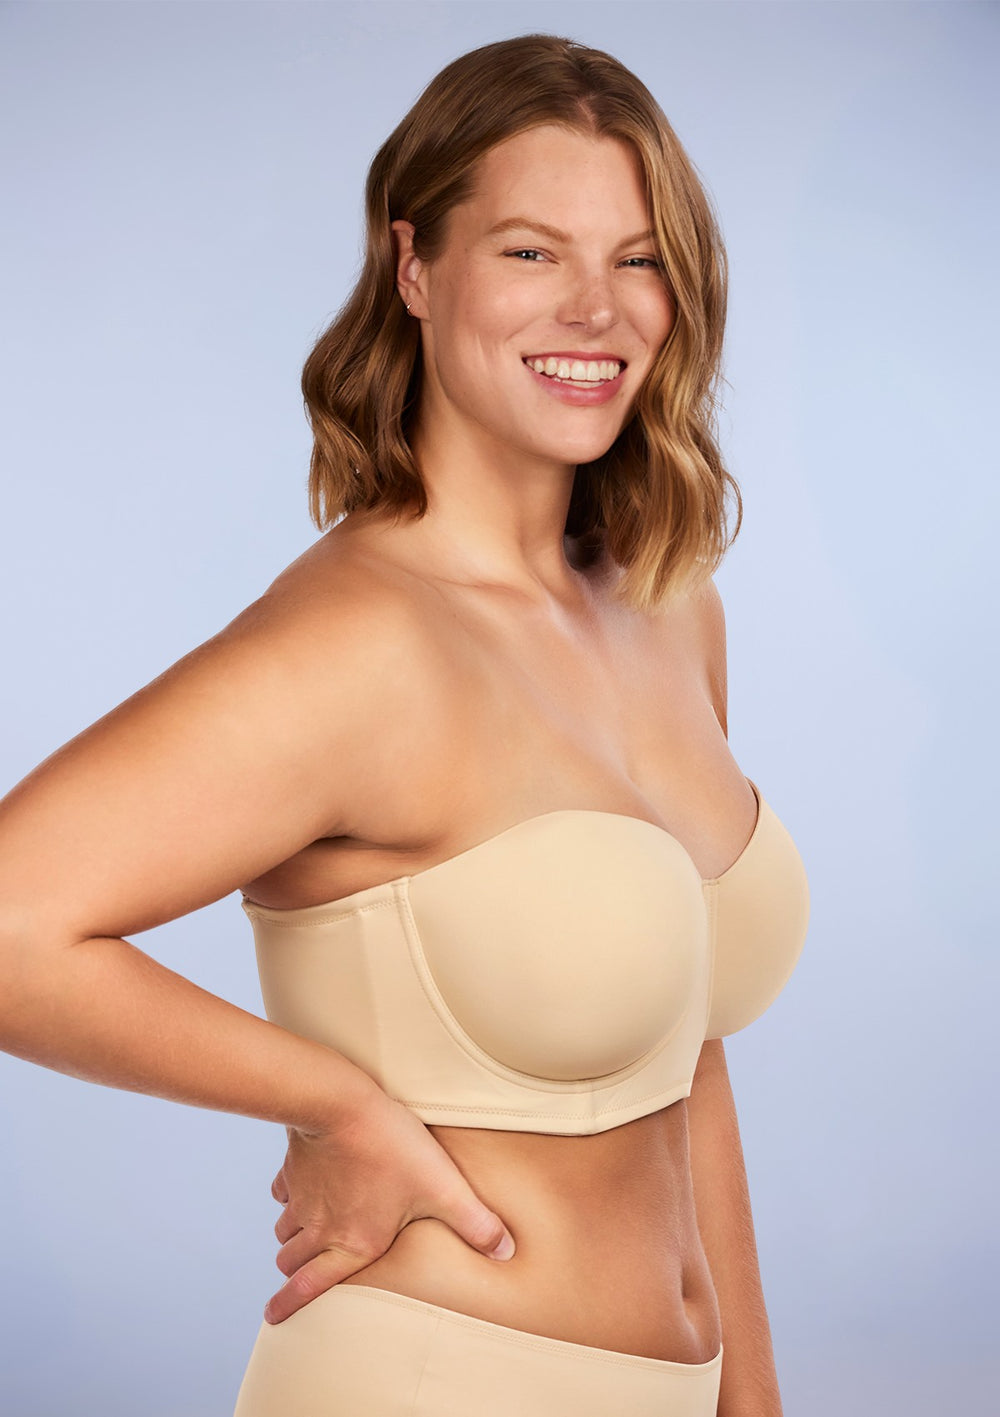 Women's Strapless Tube Top Bra, Buy online India on clearance Sale